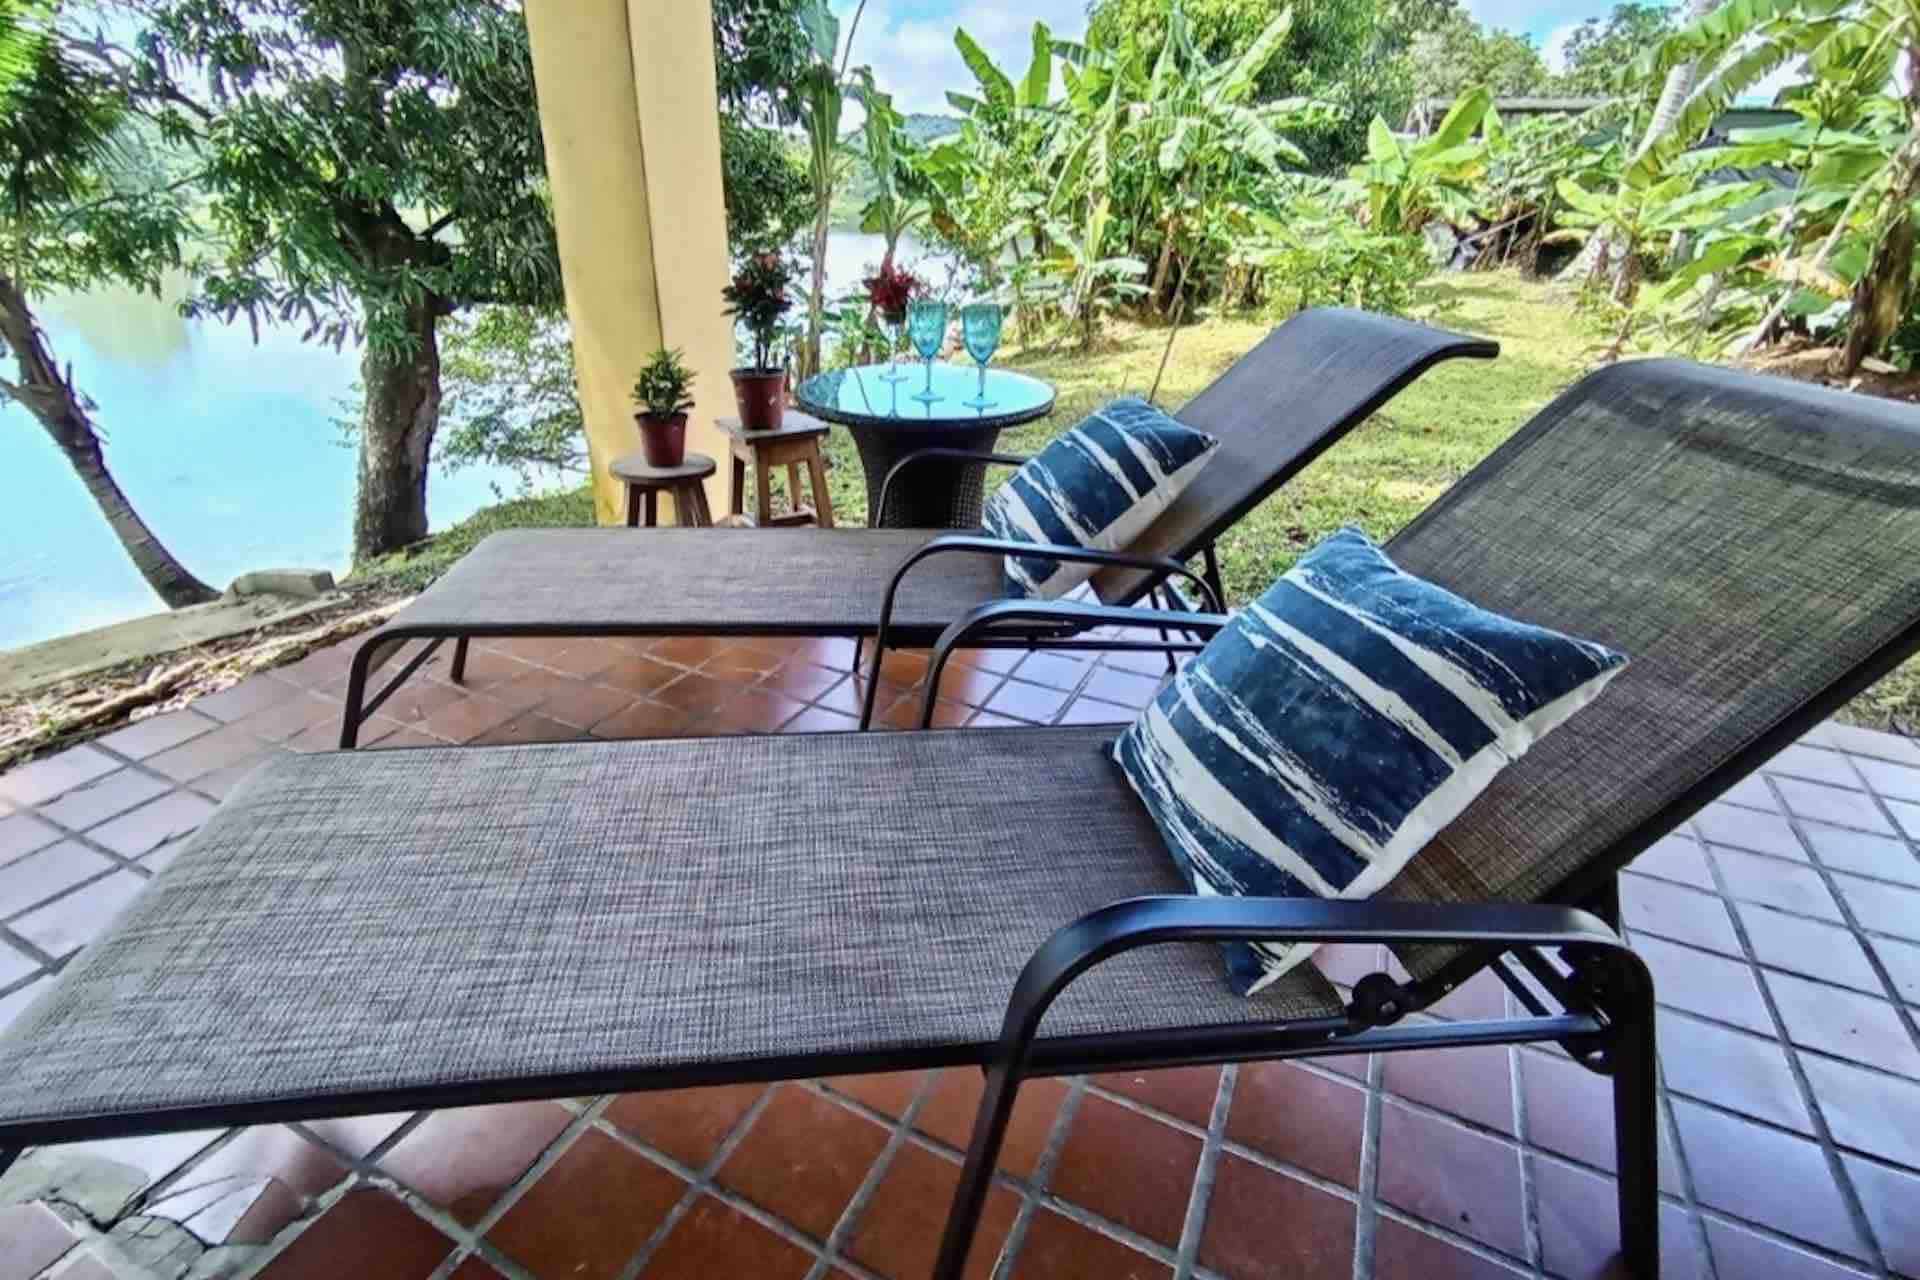 Chagres National Park lodge guesthouse lounge chairs